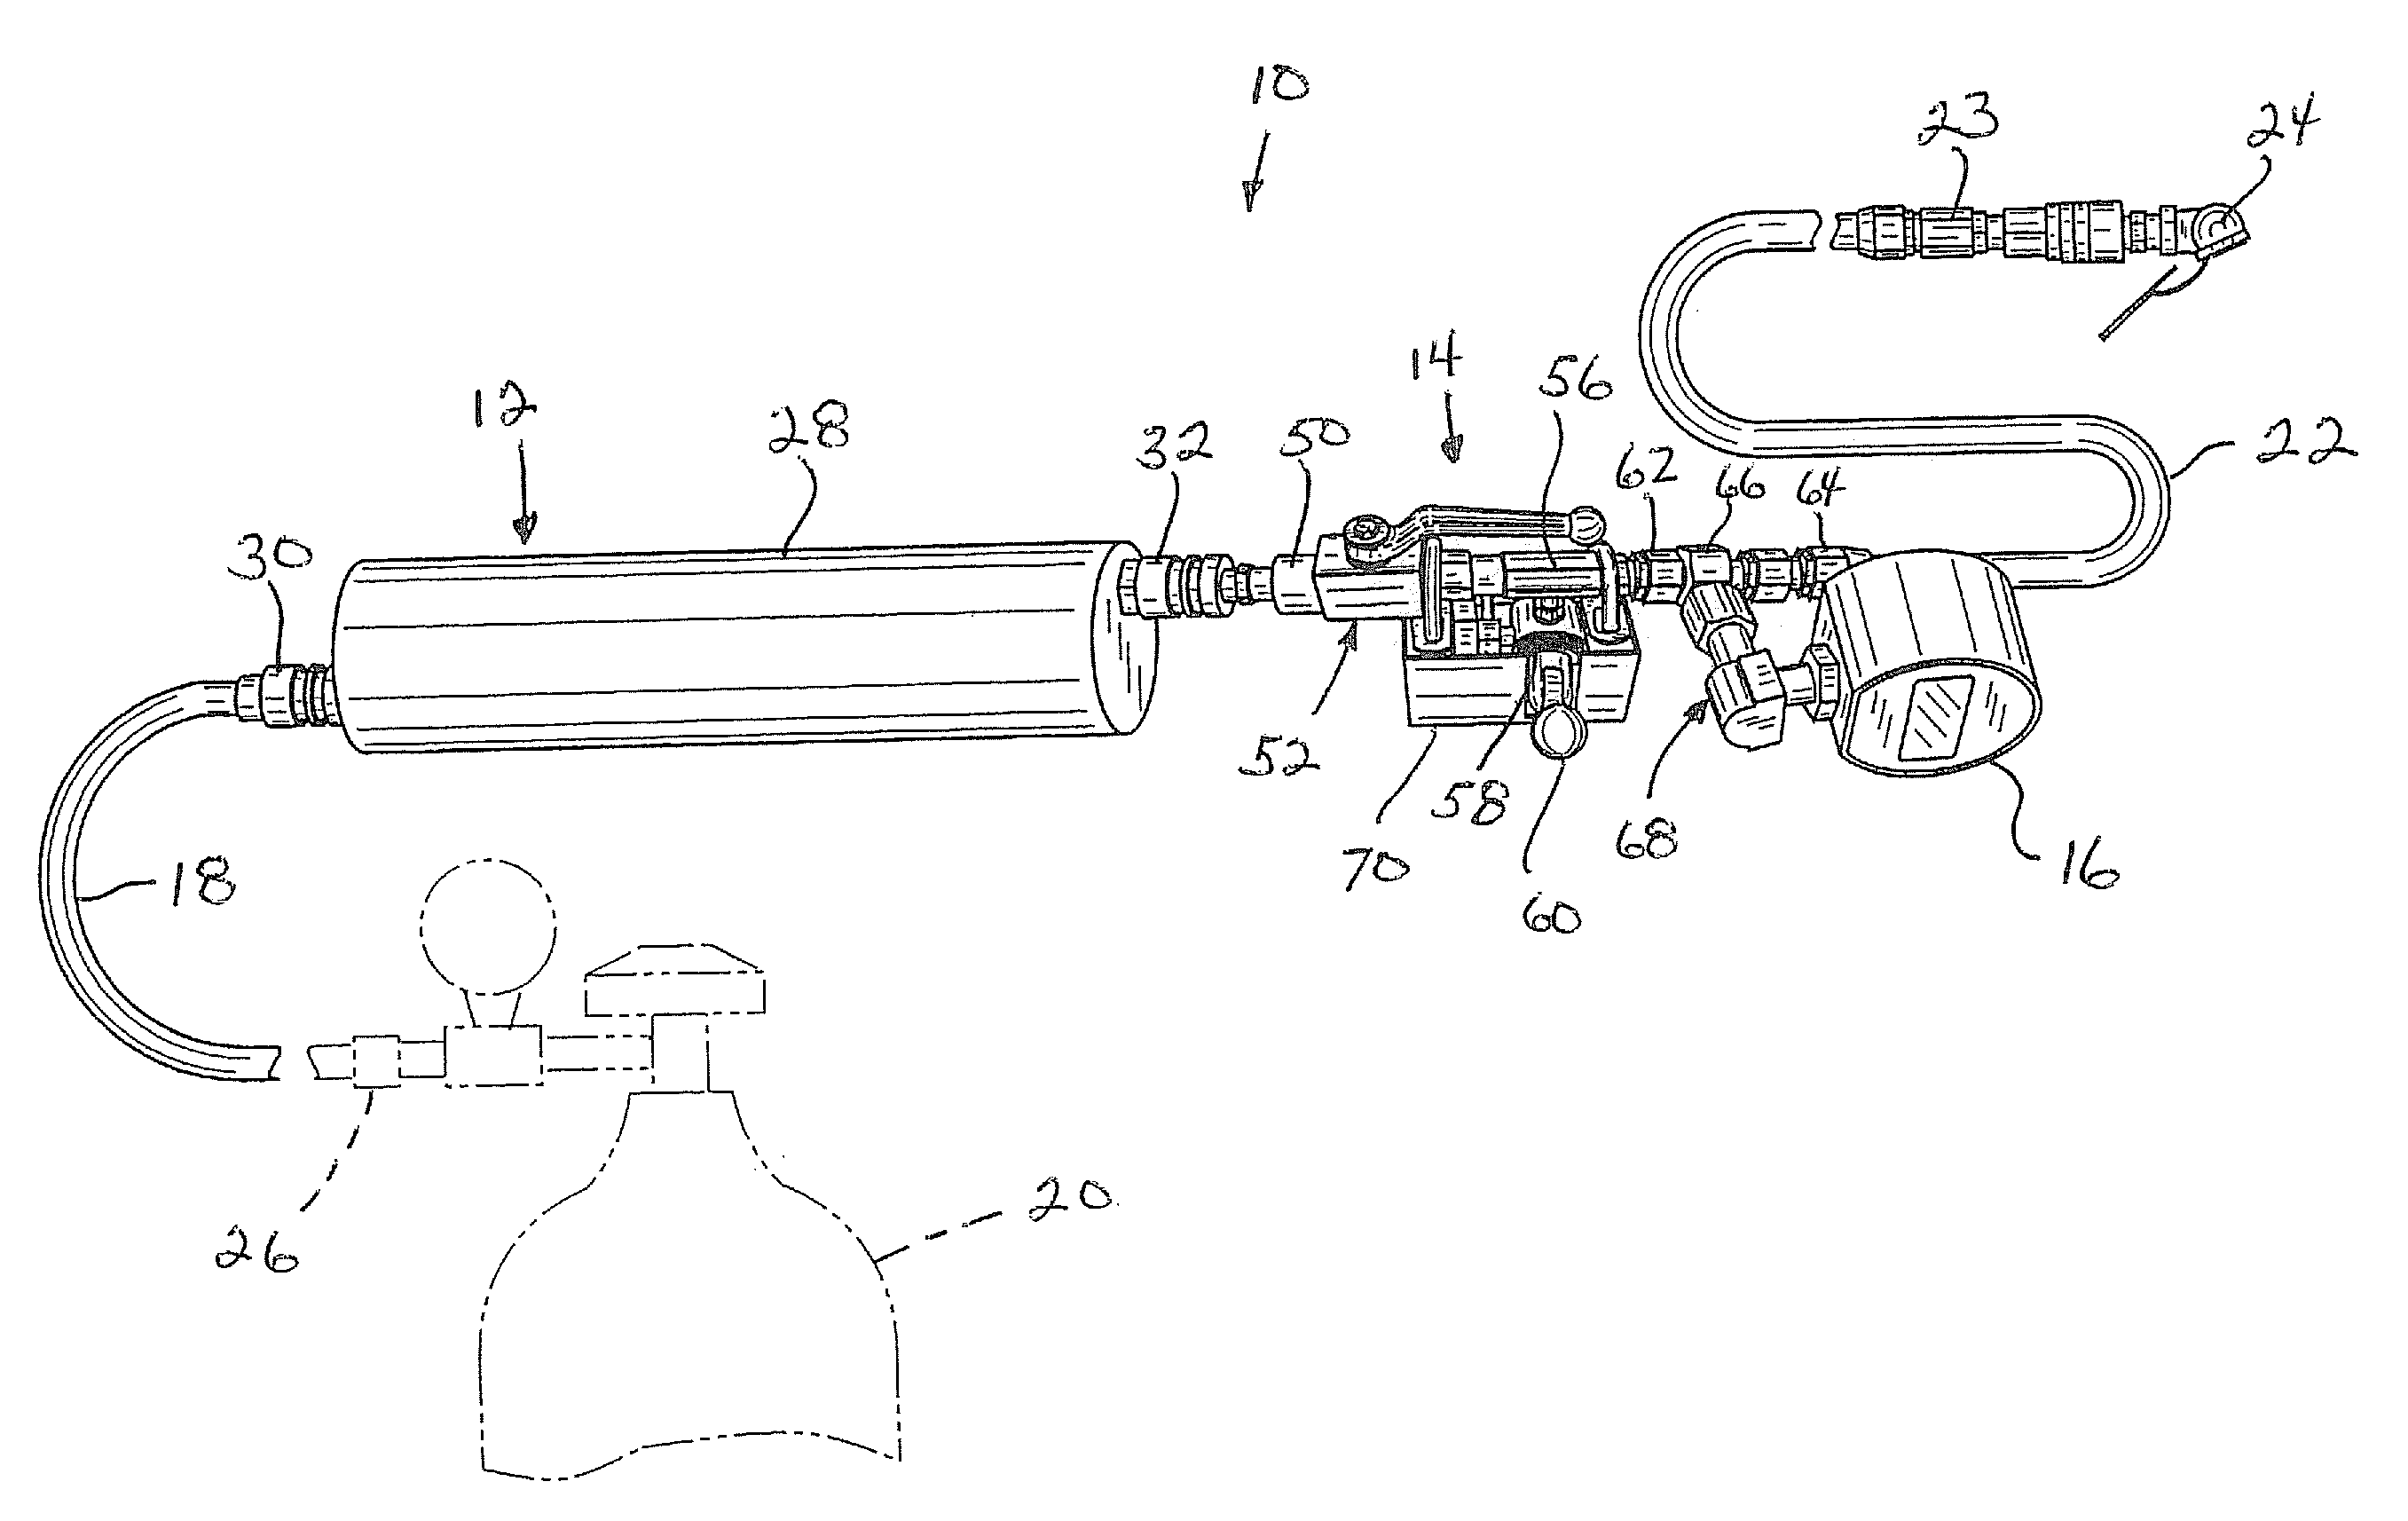 Tire purge/fill apparatus and method for use in a racing environment